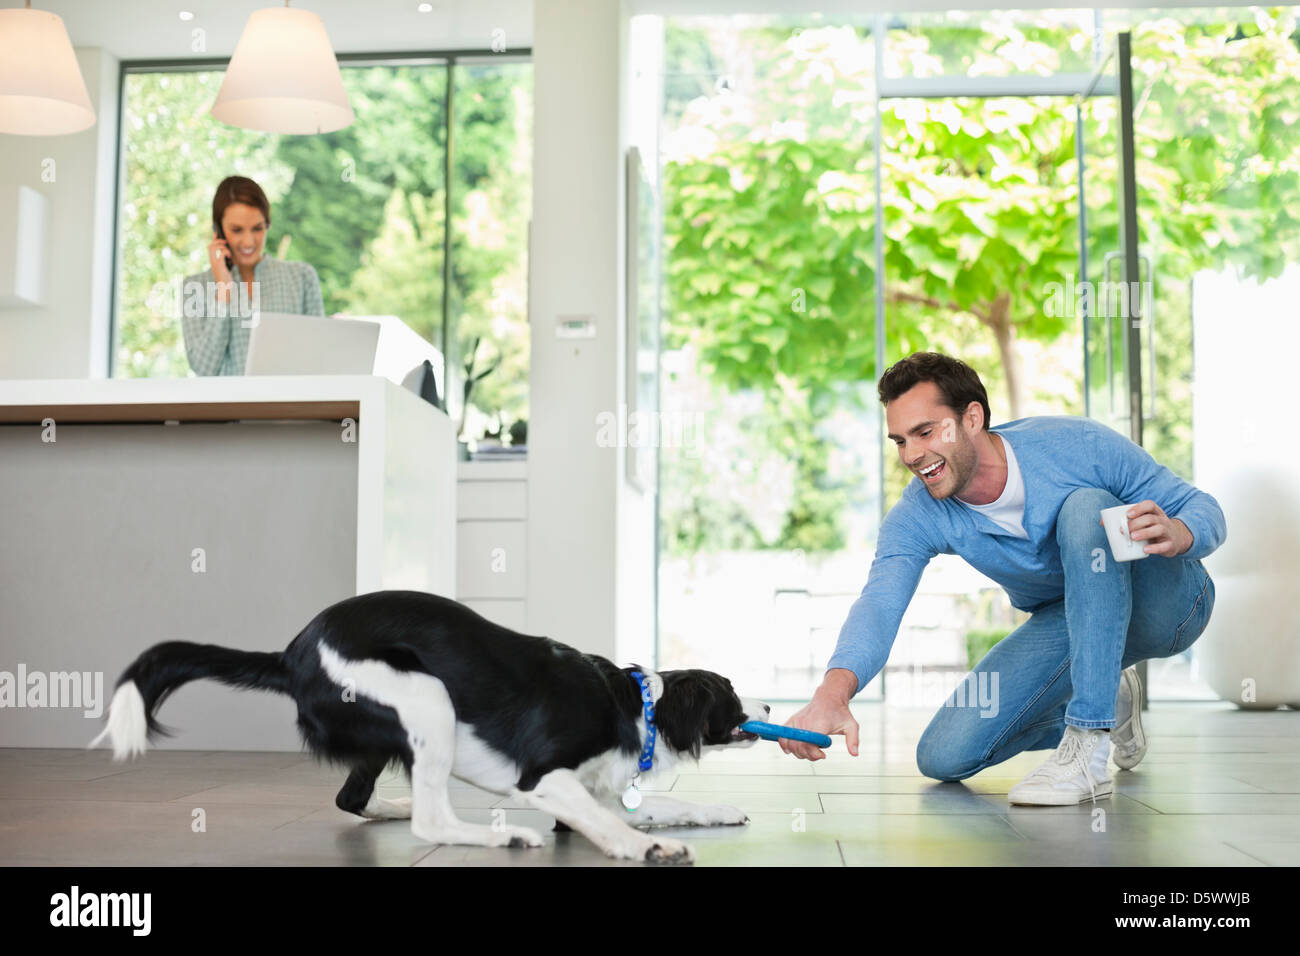 Man Playing with dog in kitchen Banque D'Images